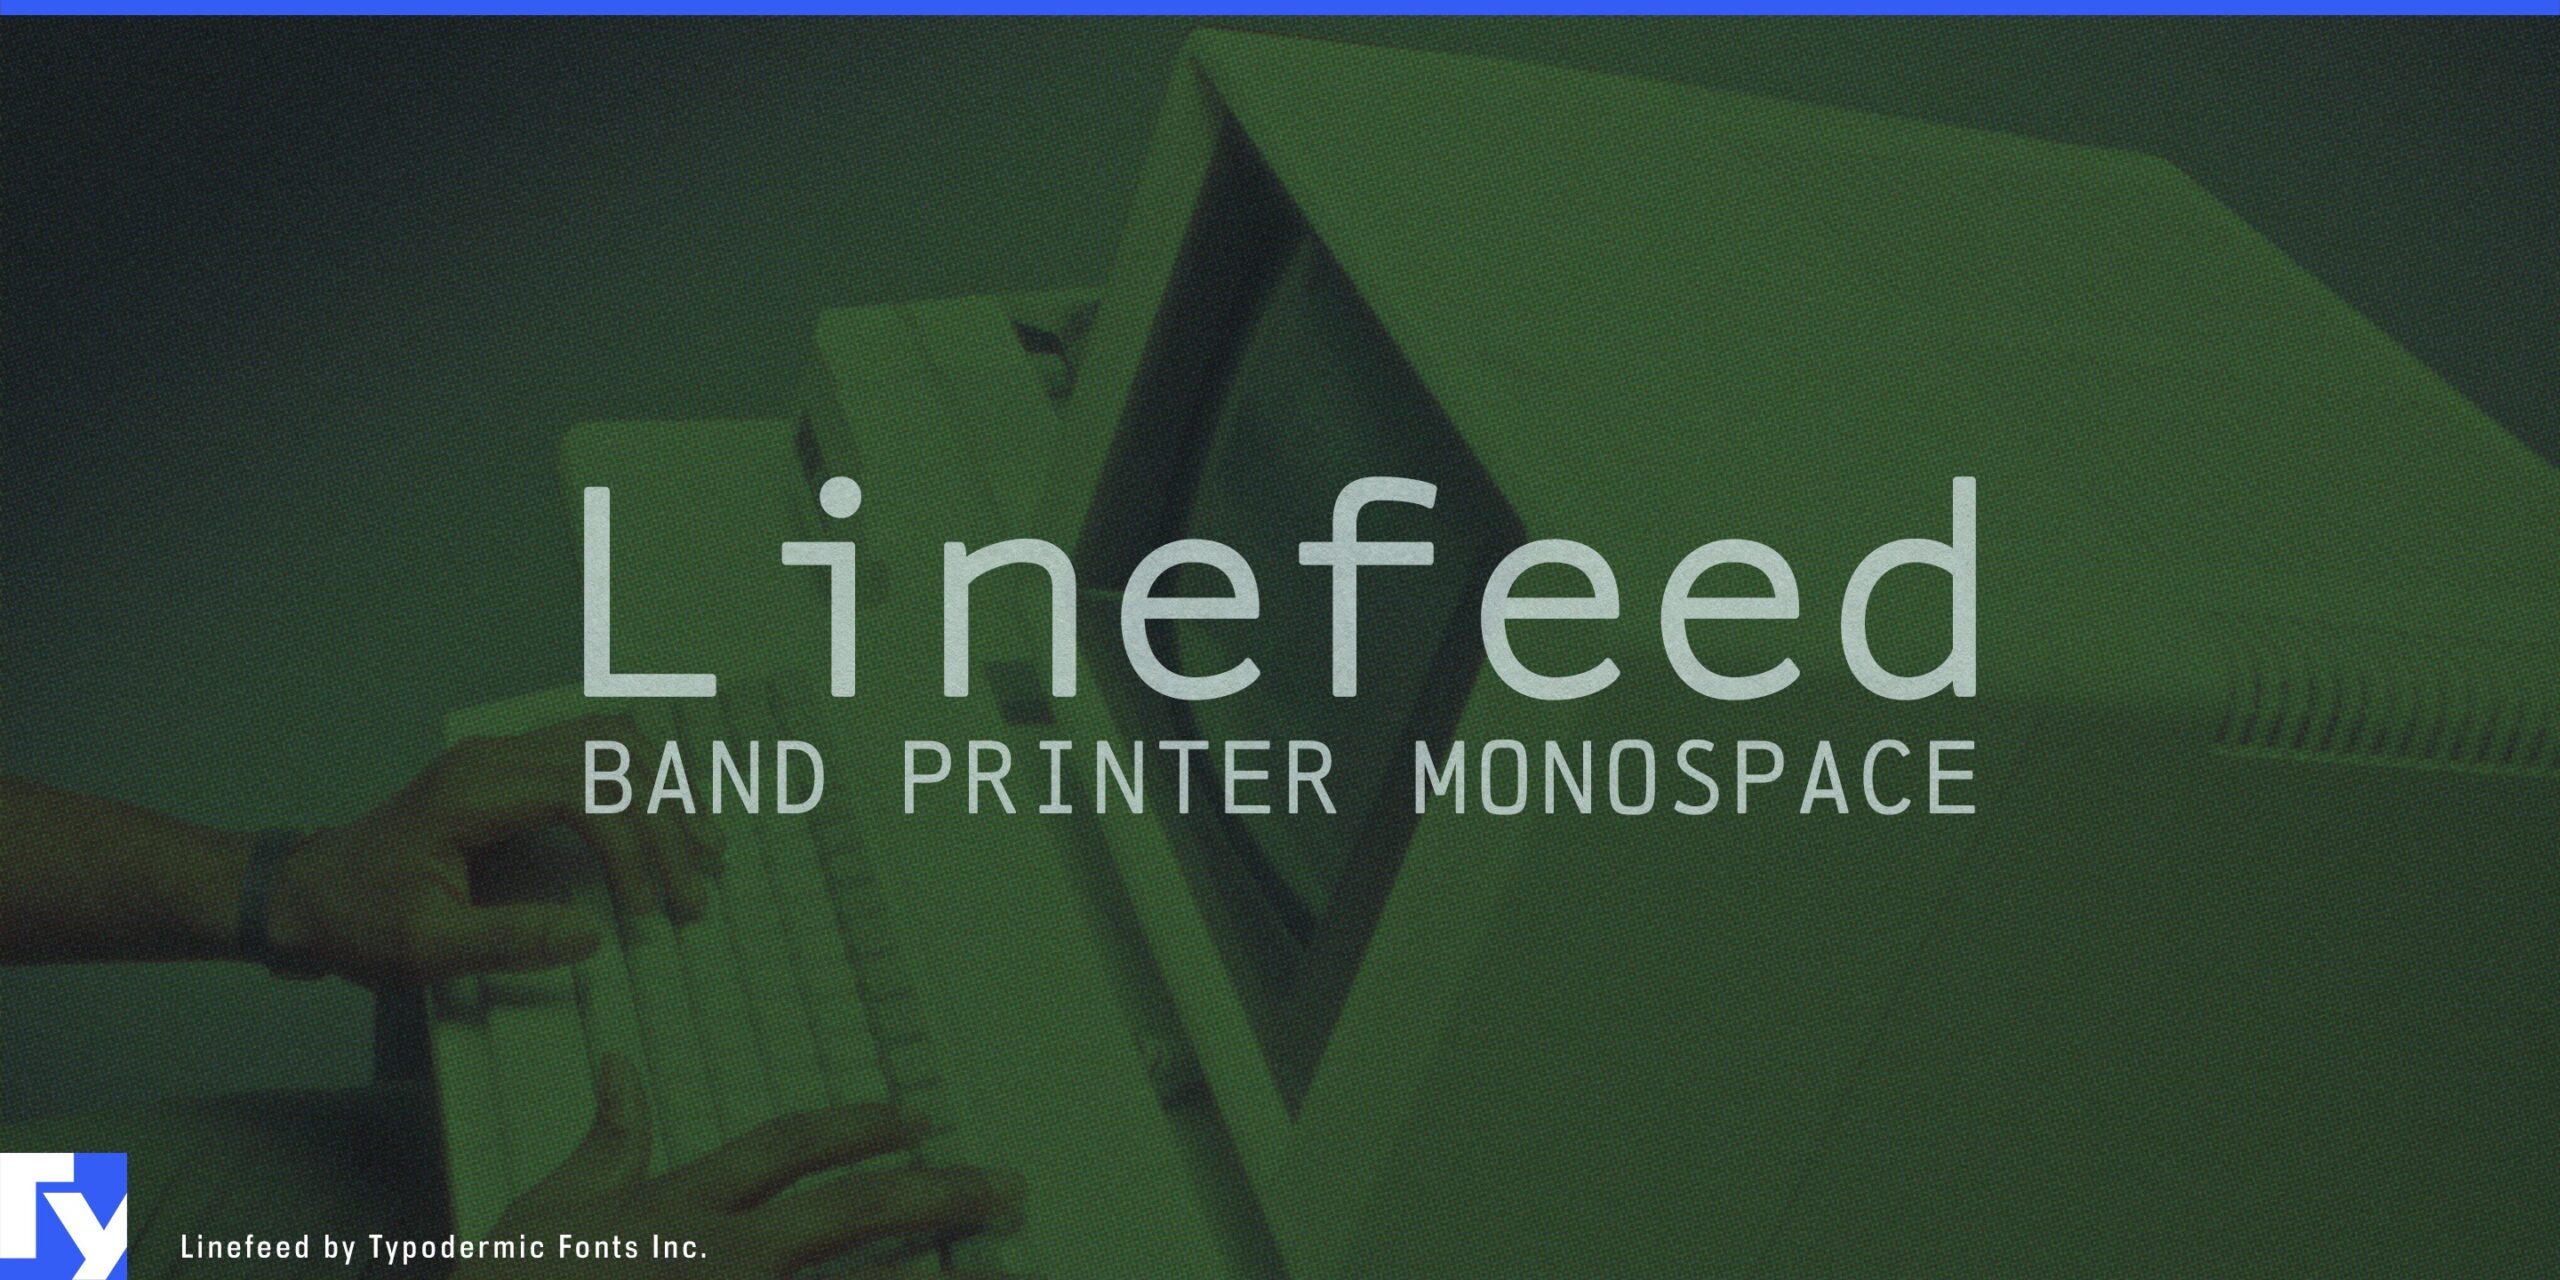 Vintage Documents Revisited: Linefeed Typeface's Widespread Usage